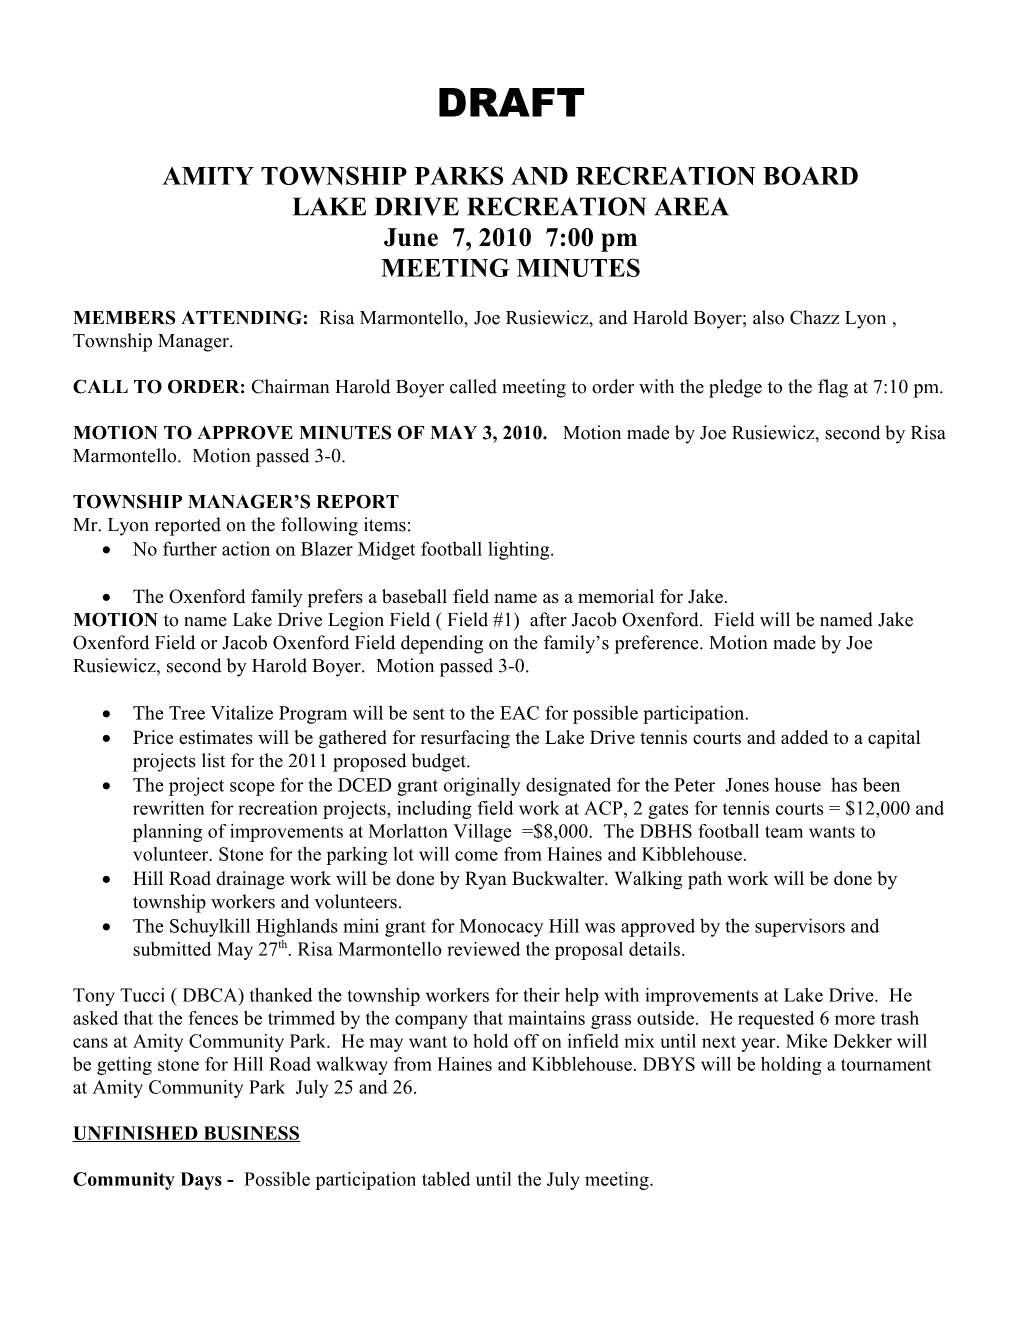 Amity Township Parks and Recreation Board s1